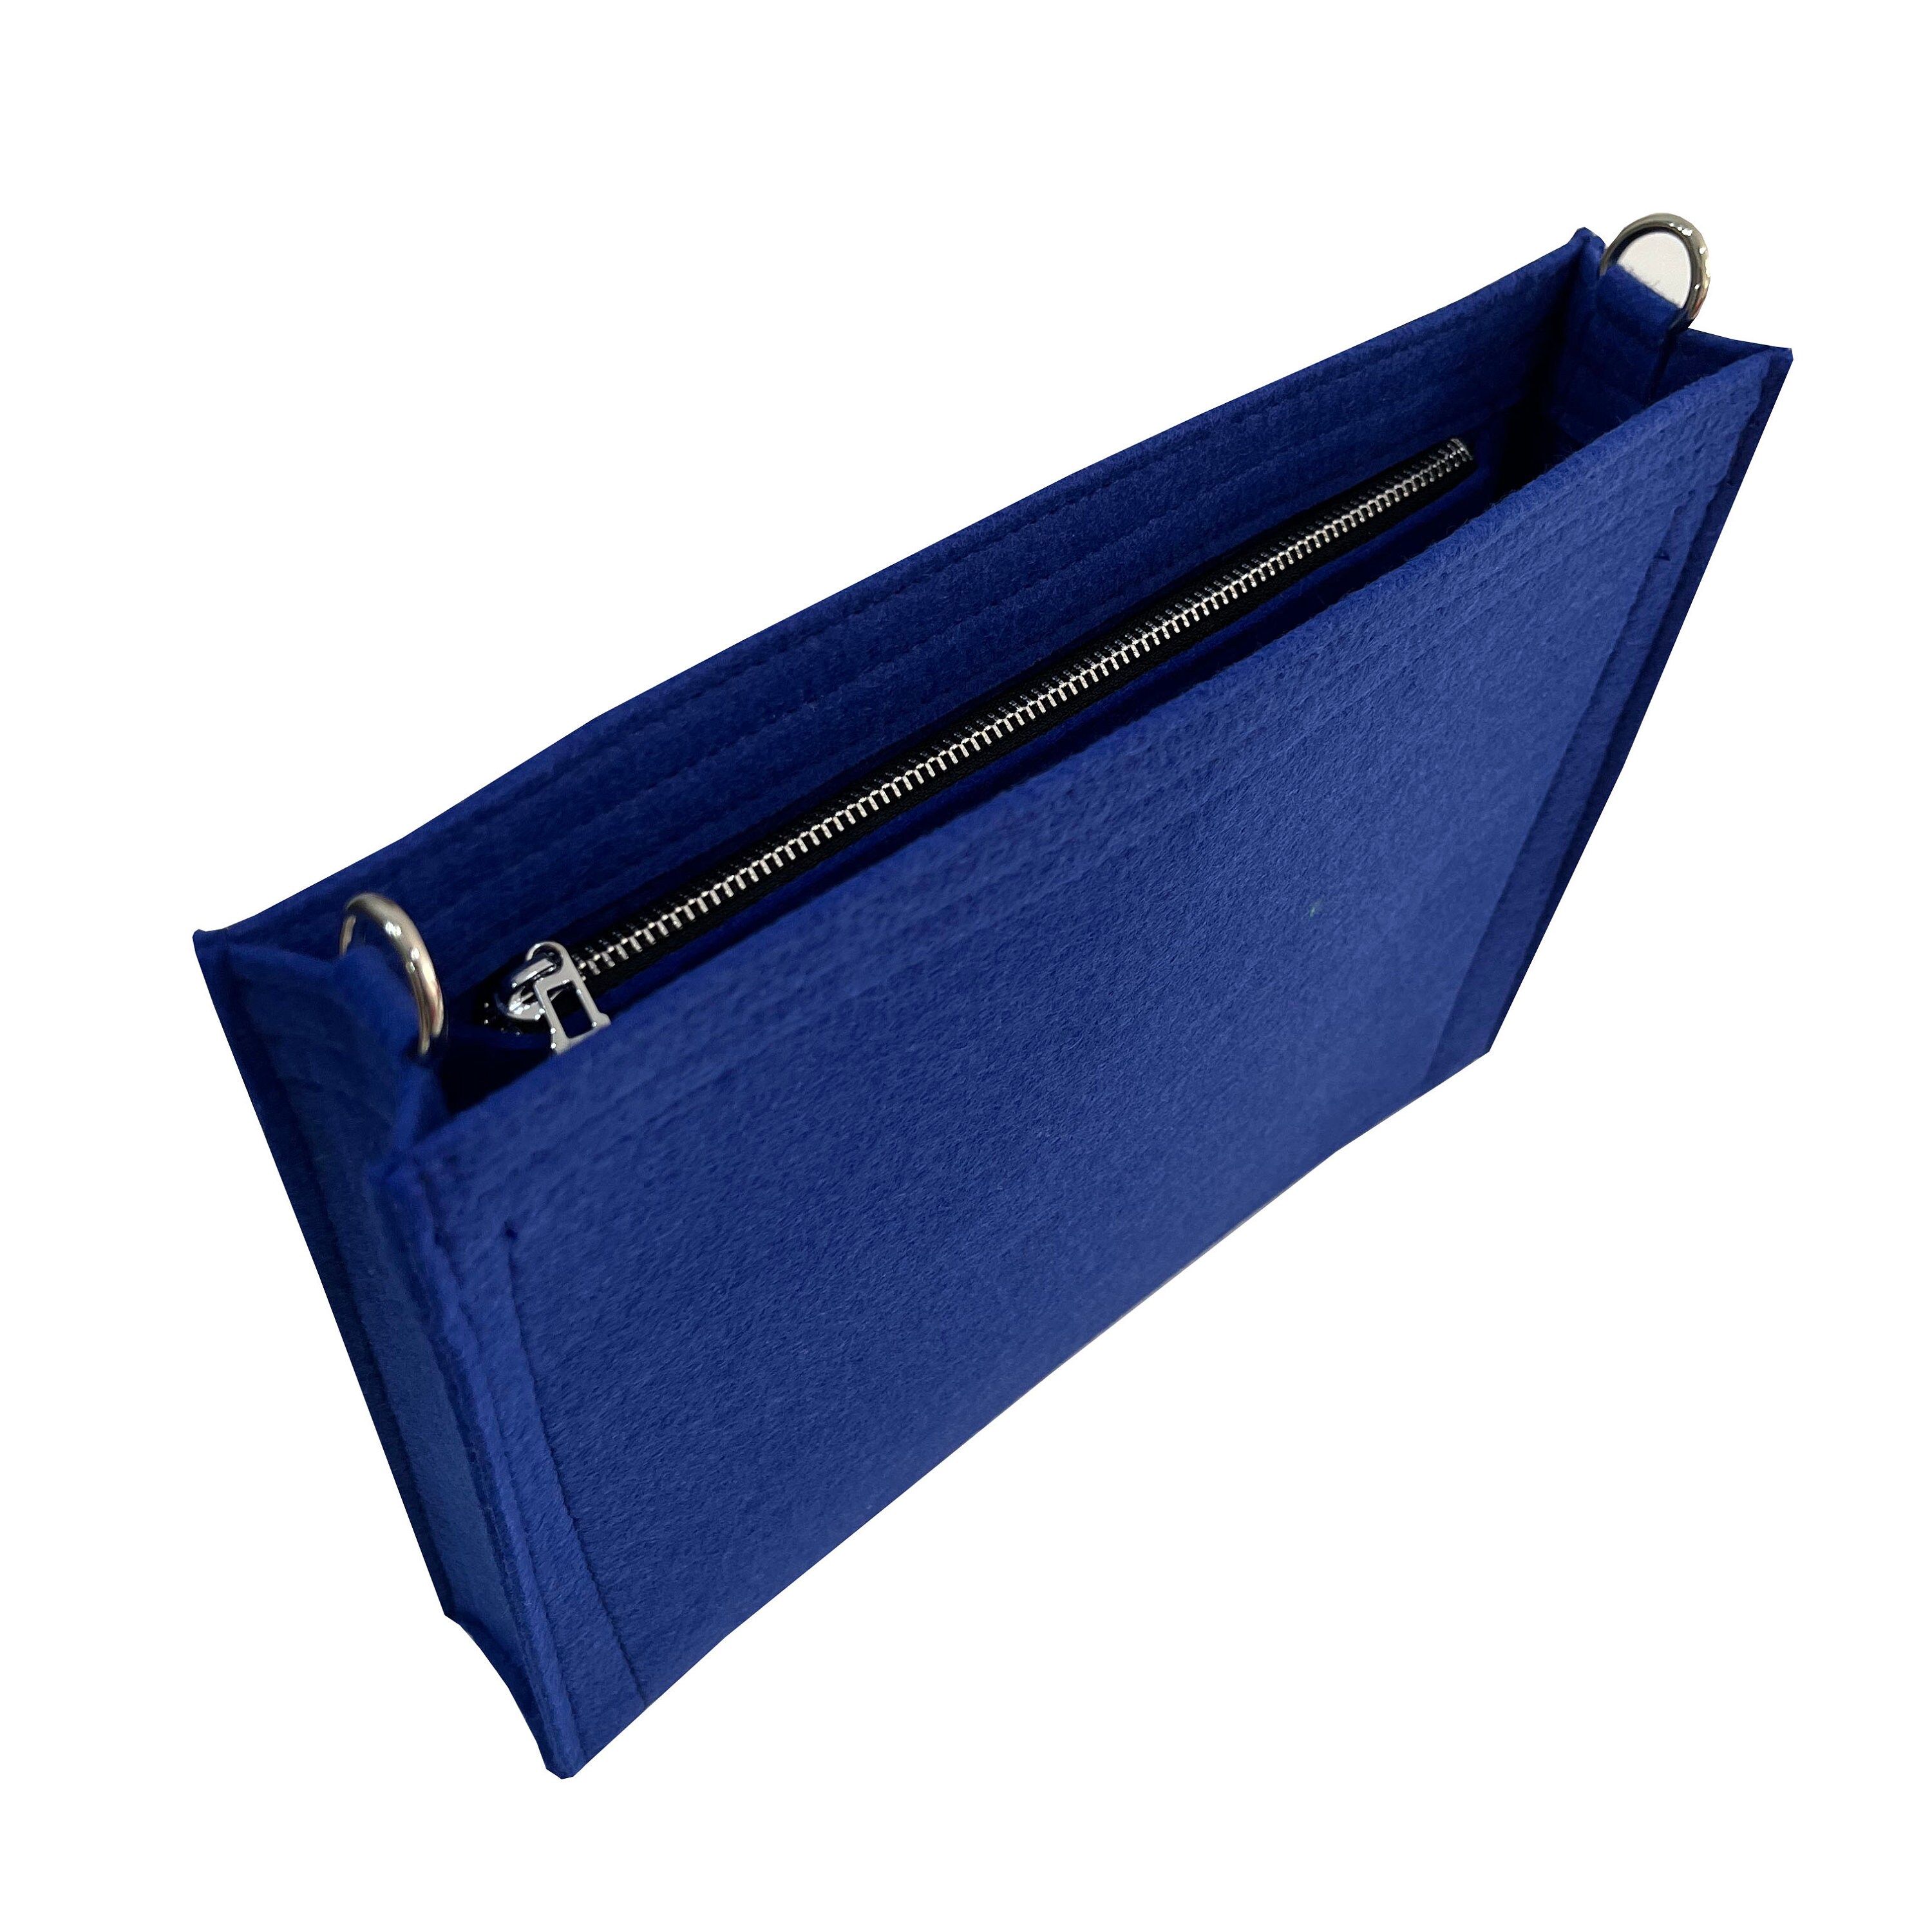 M44498 ETUI VOYAGE GM MM M44499 Designer Clutch Bag Travel Sleeve Laptop  Tablet File Holder Document Case Cover Pouch Bags Pochette Accessoires From  Join2, $92.34